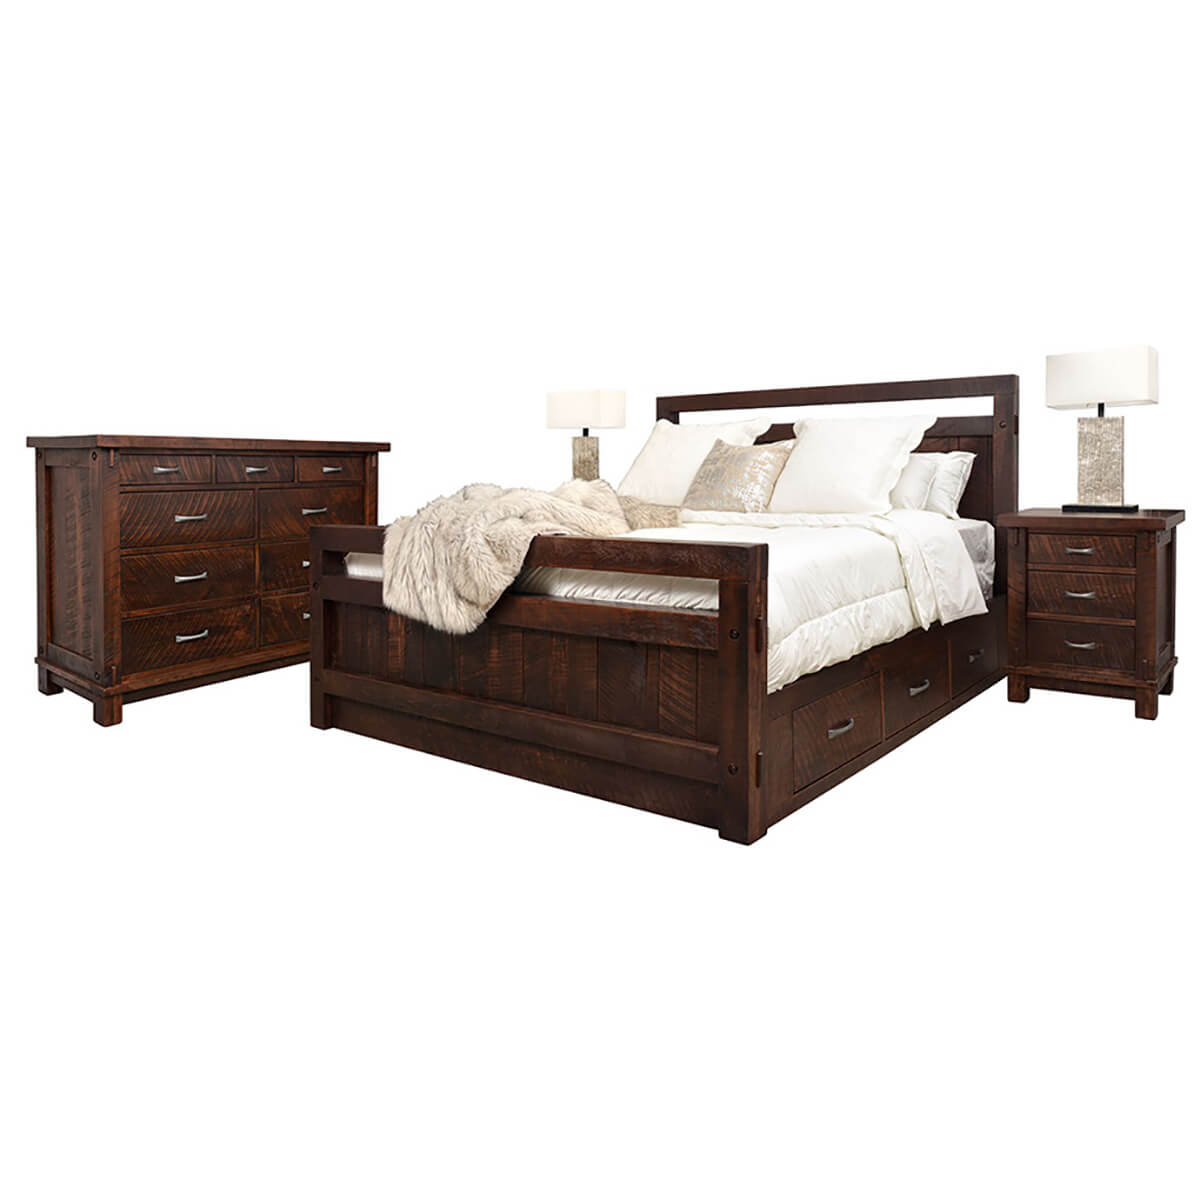 TimberBedroomCollection105220